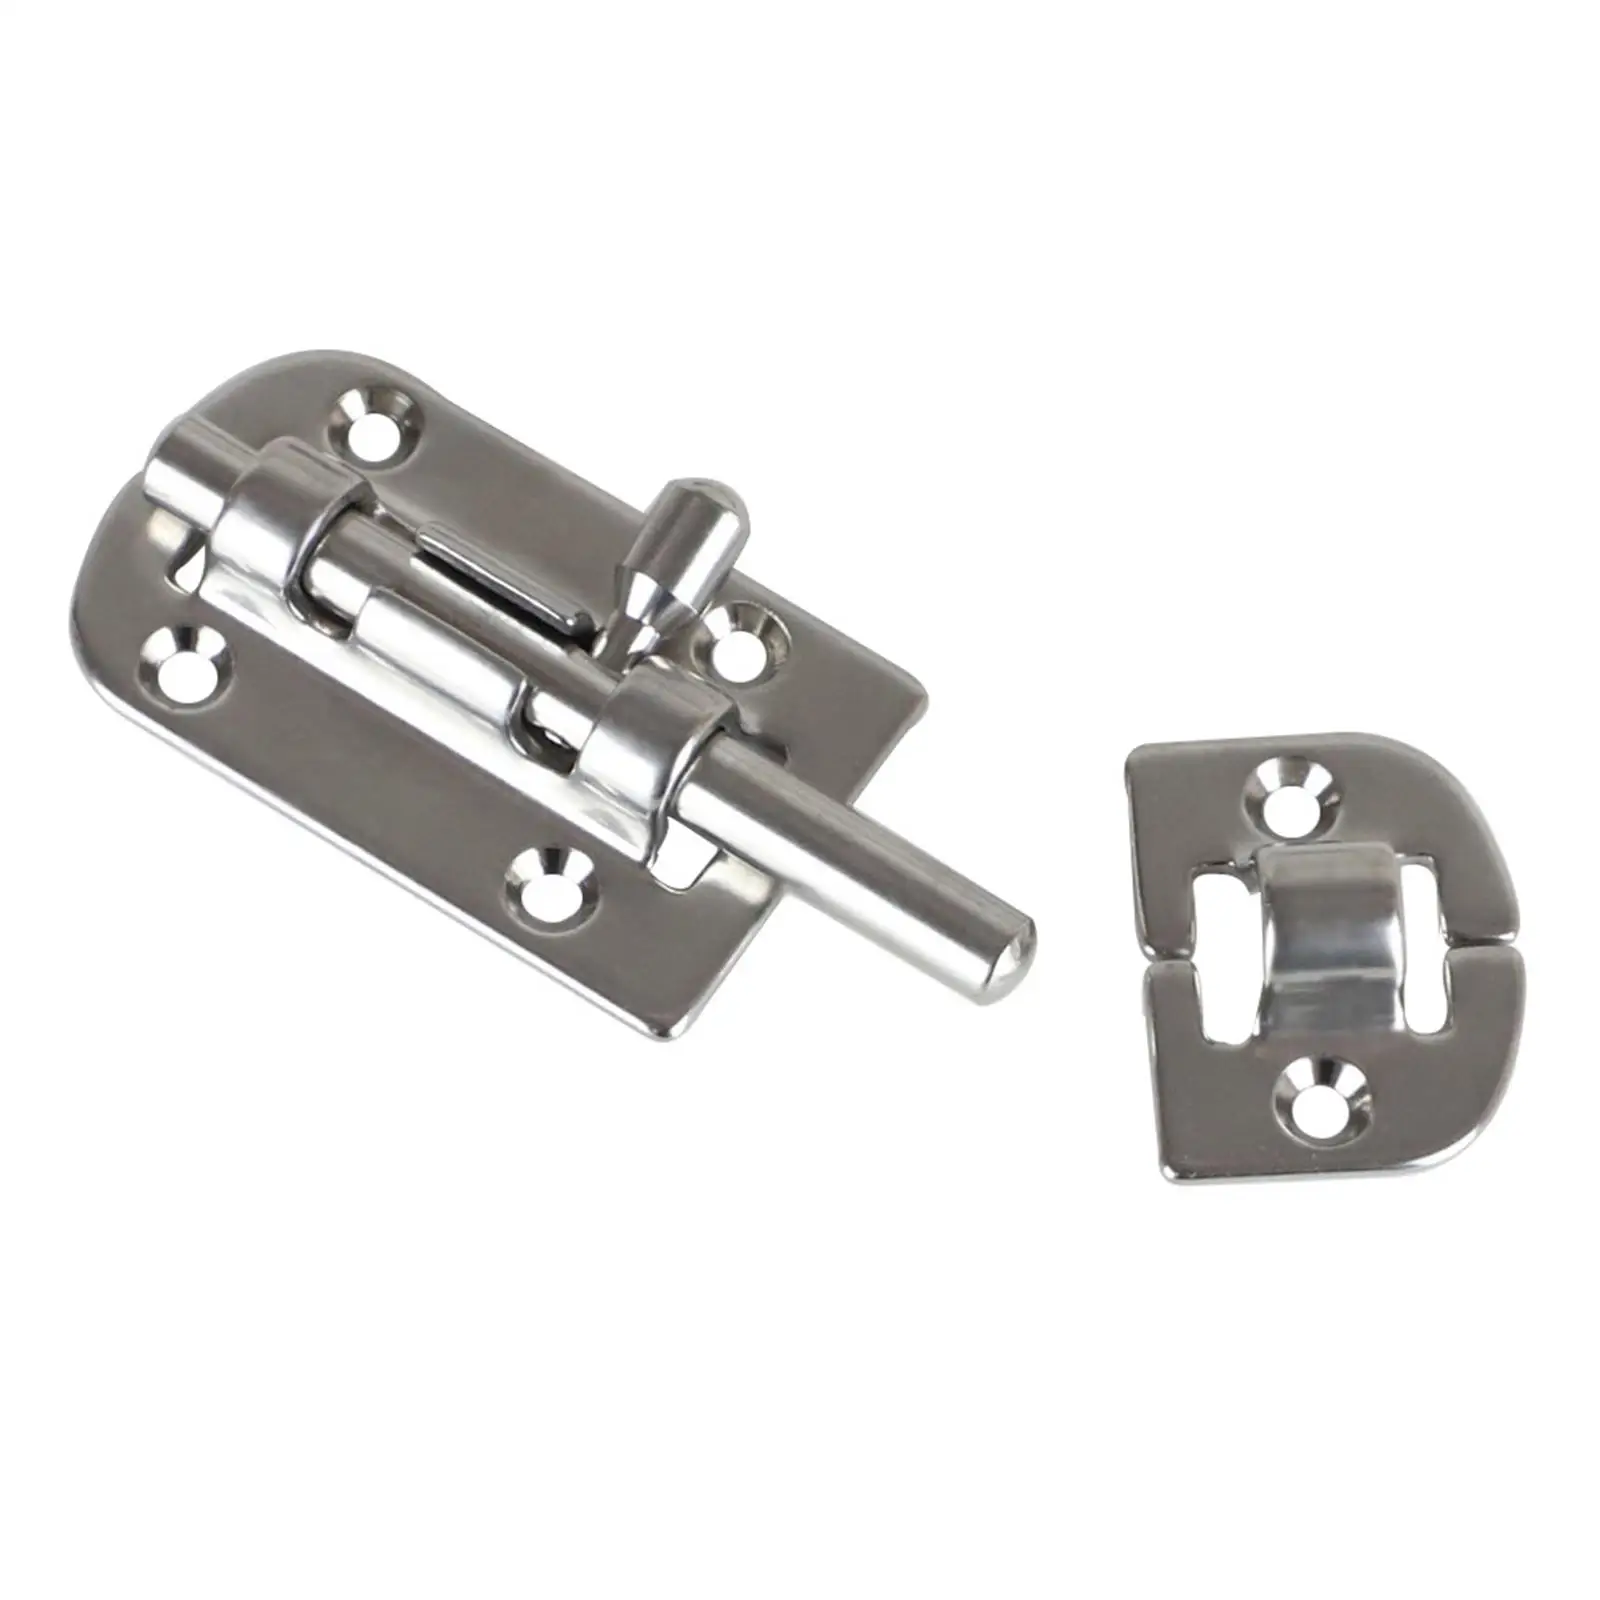 Boat Door Lock Latch Yachts Safety Protection Hardware Accessories Heavy Duty